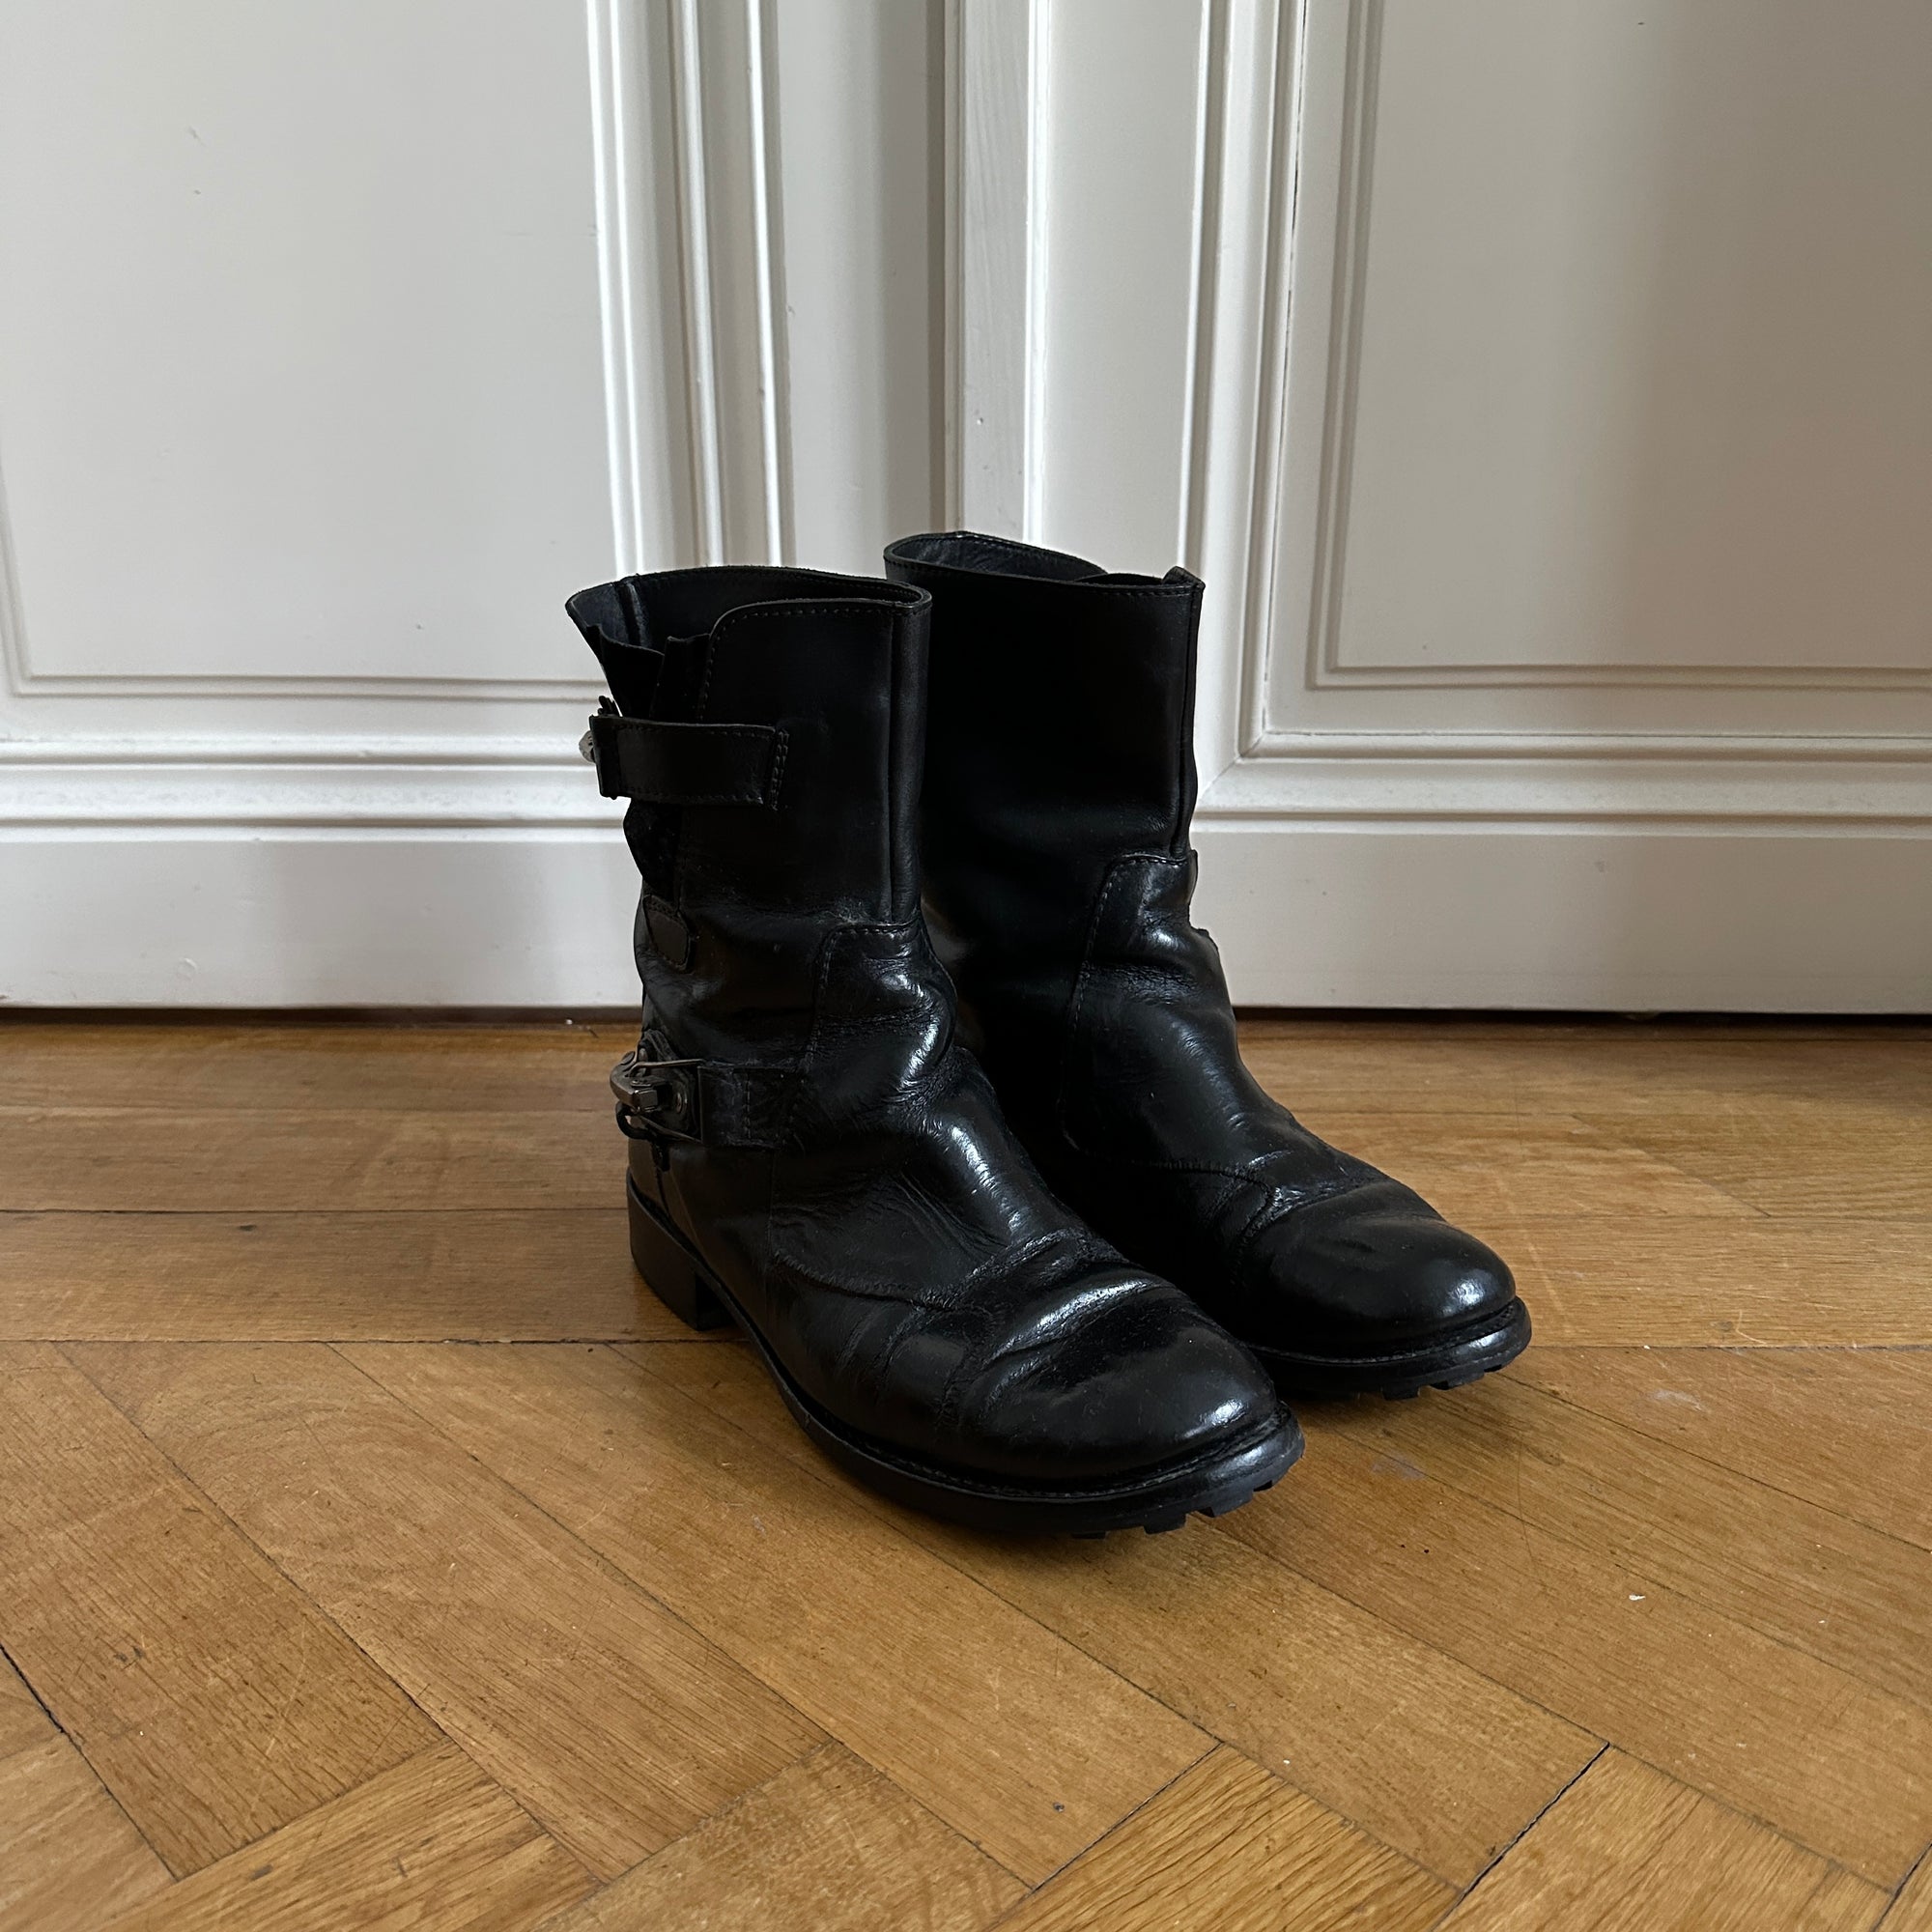 Jean Paul Gaultier Homme 80s Buckled Black Leather Boots